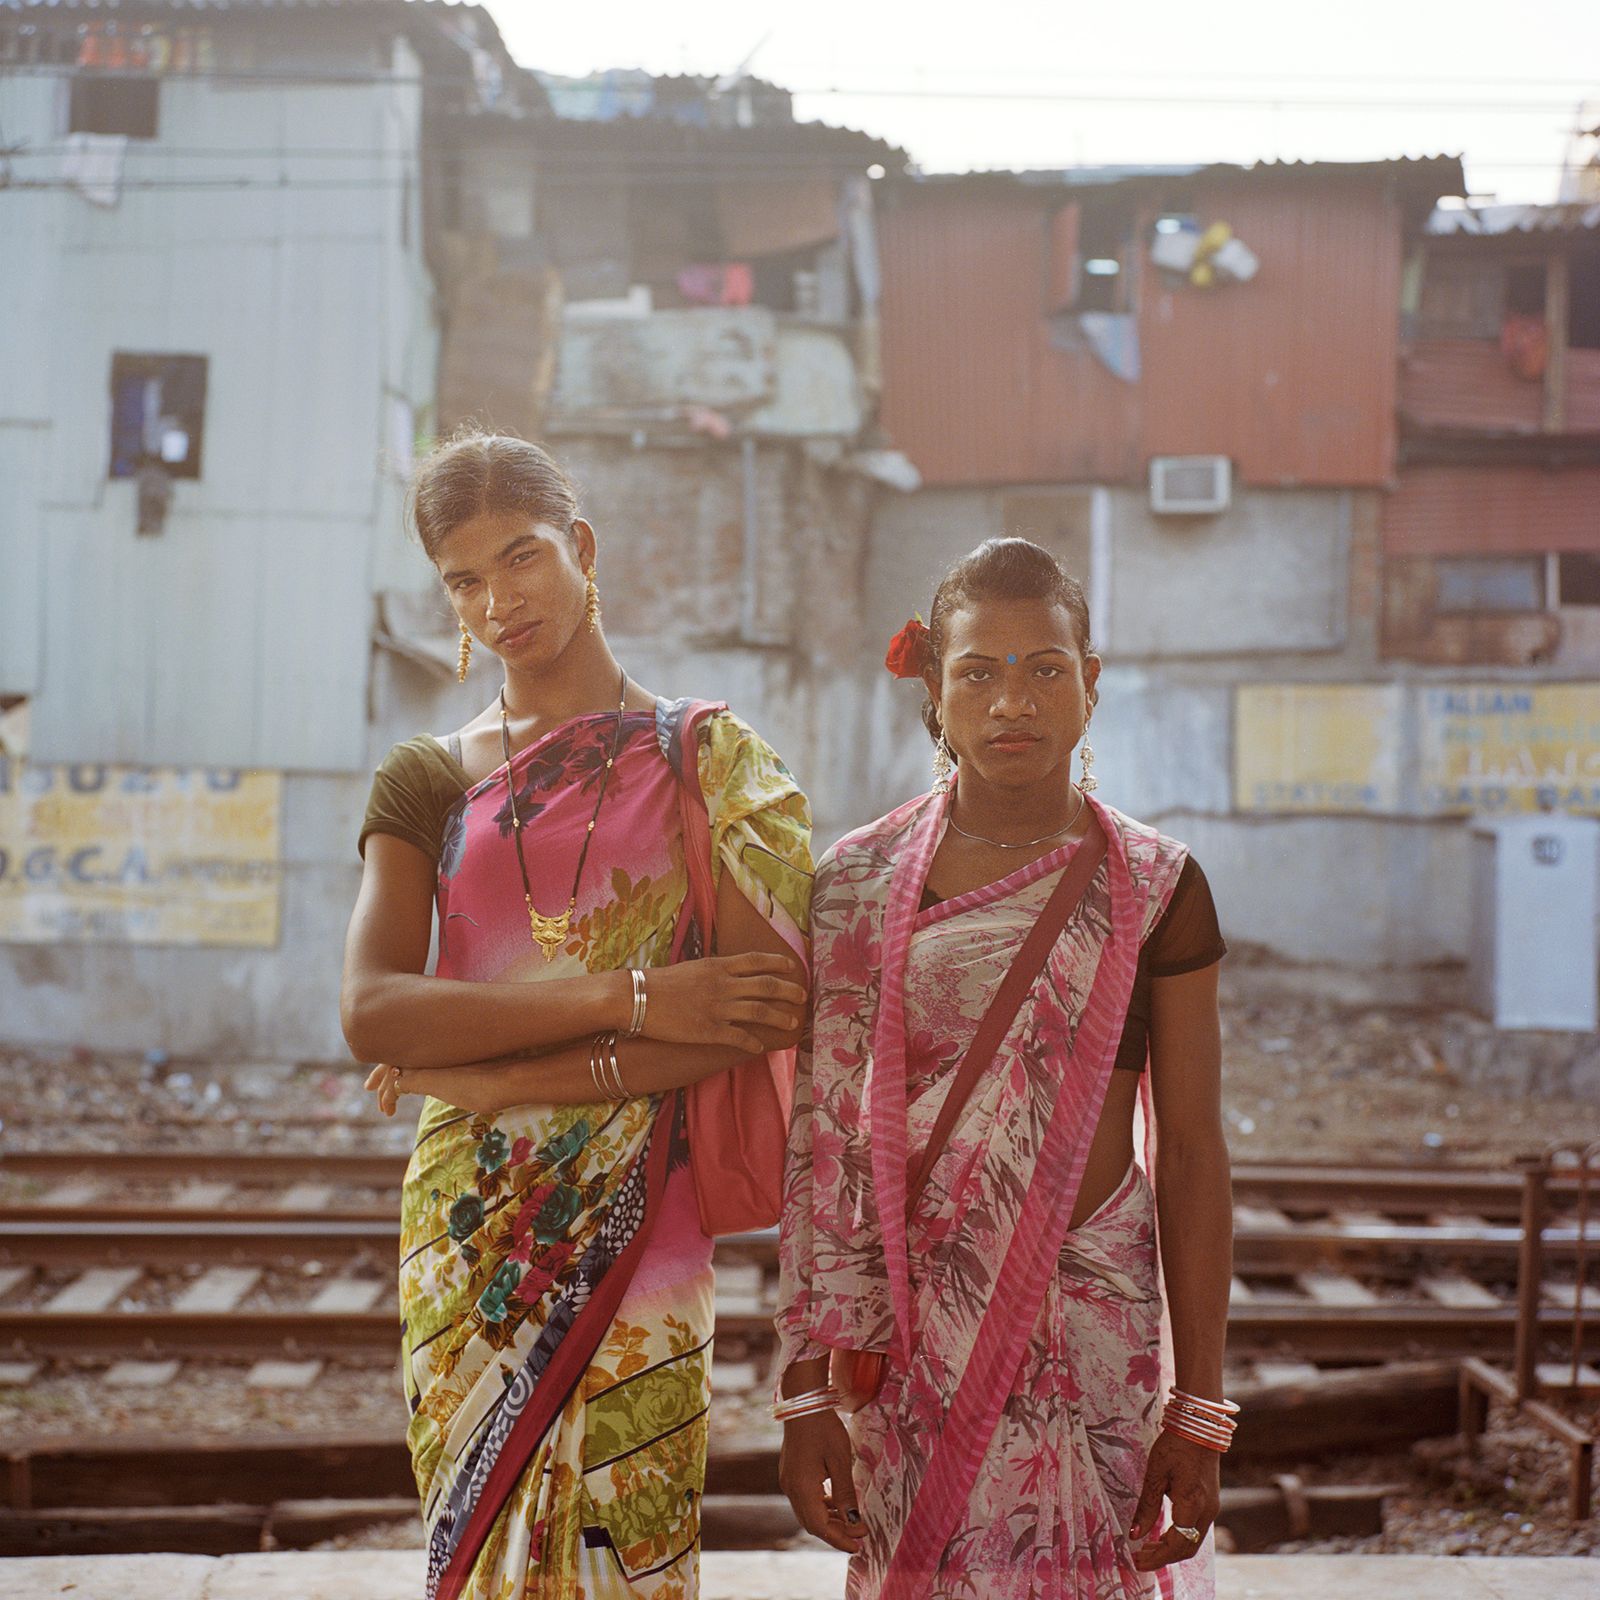 © Sara Hylton - Rajni, 20 and Puja, 23 from Orissa pose for a portrait while waiting for the train at Bandra station.